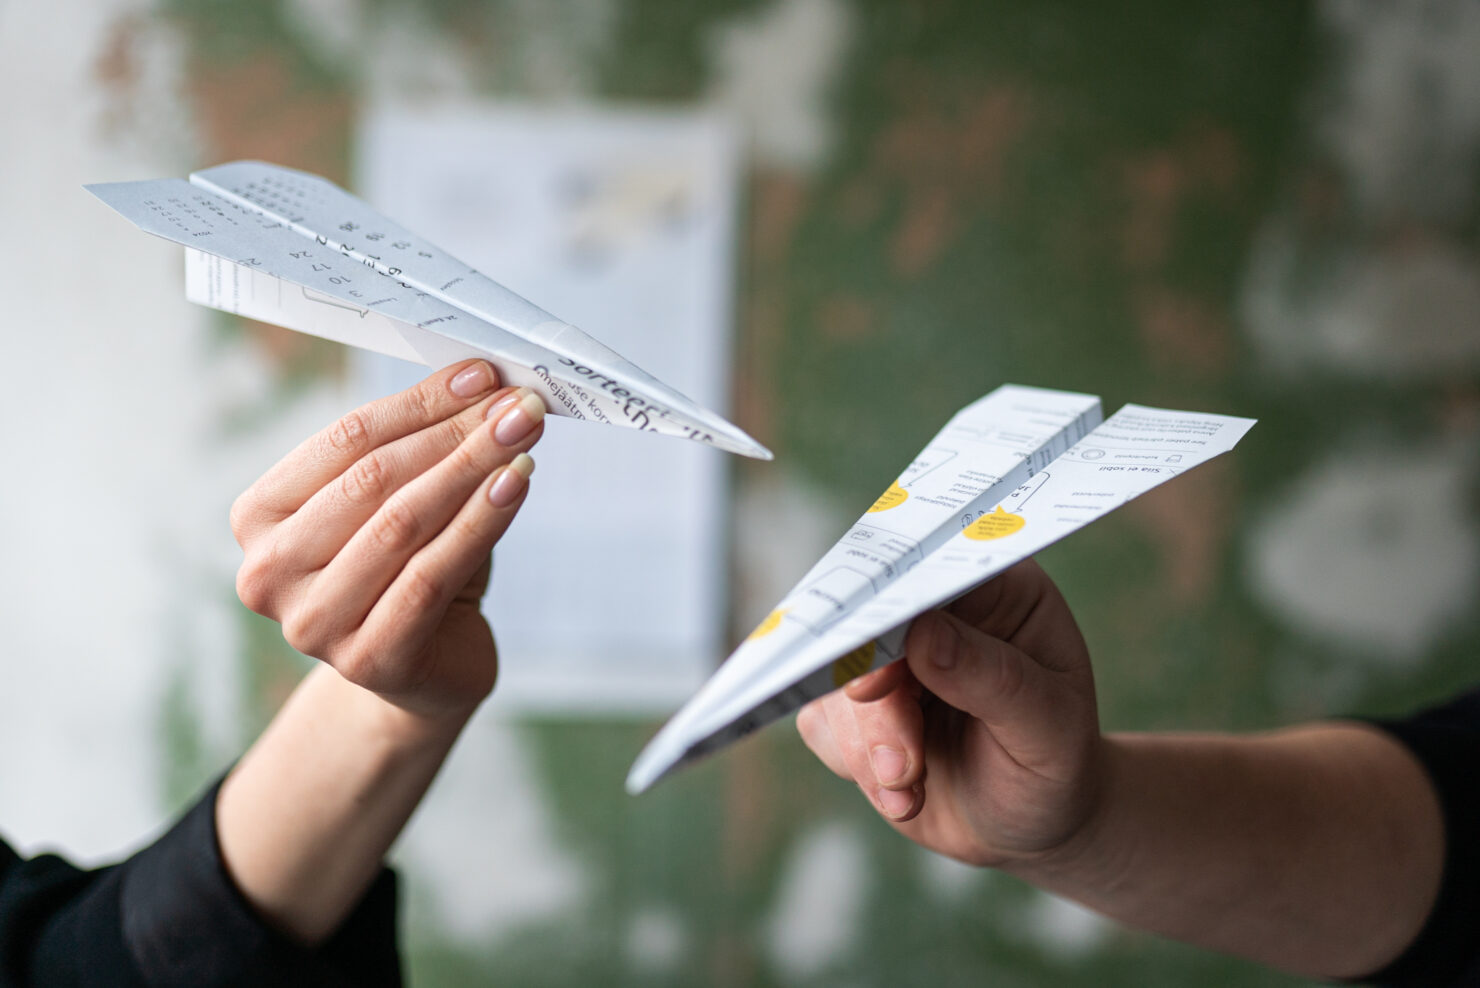 Paper planes made out of calendar pages